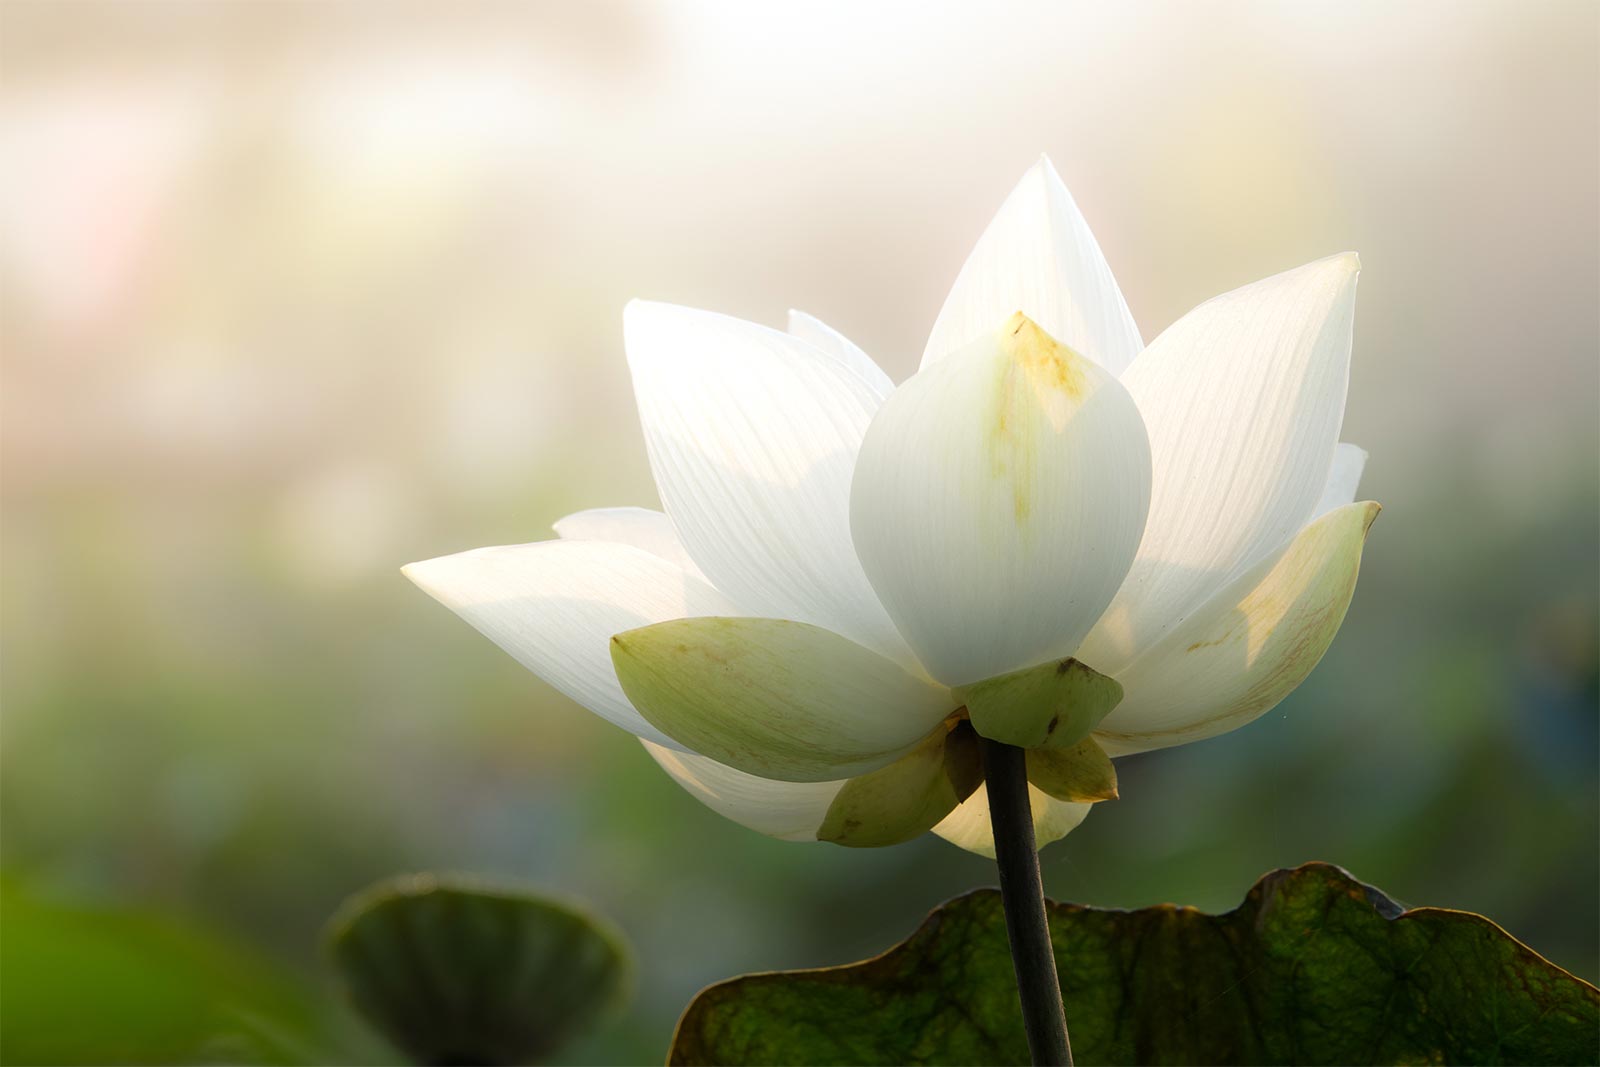 A beautiful and calming white lotus blooming under the sun.